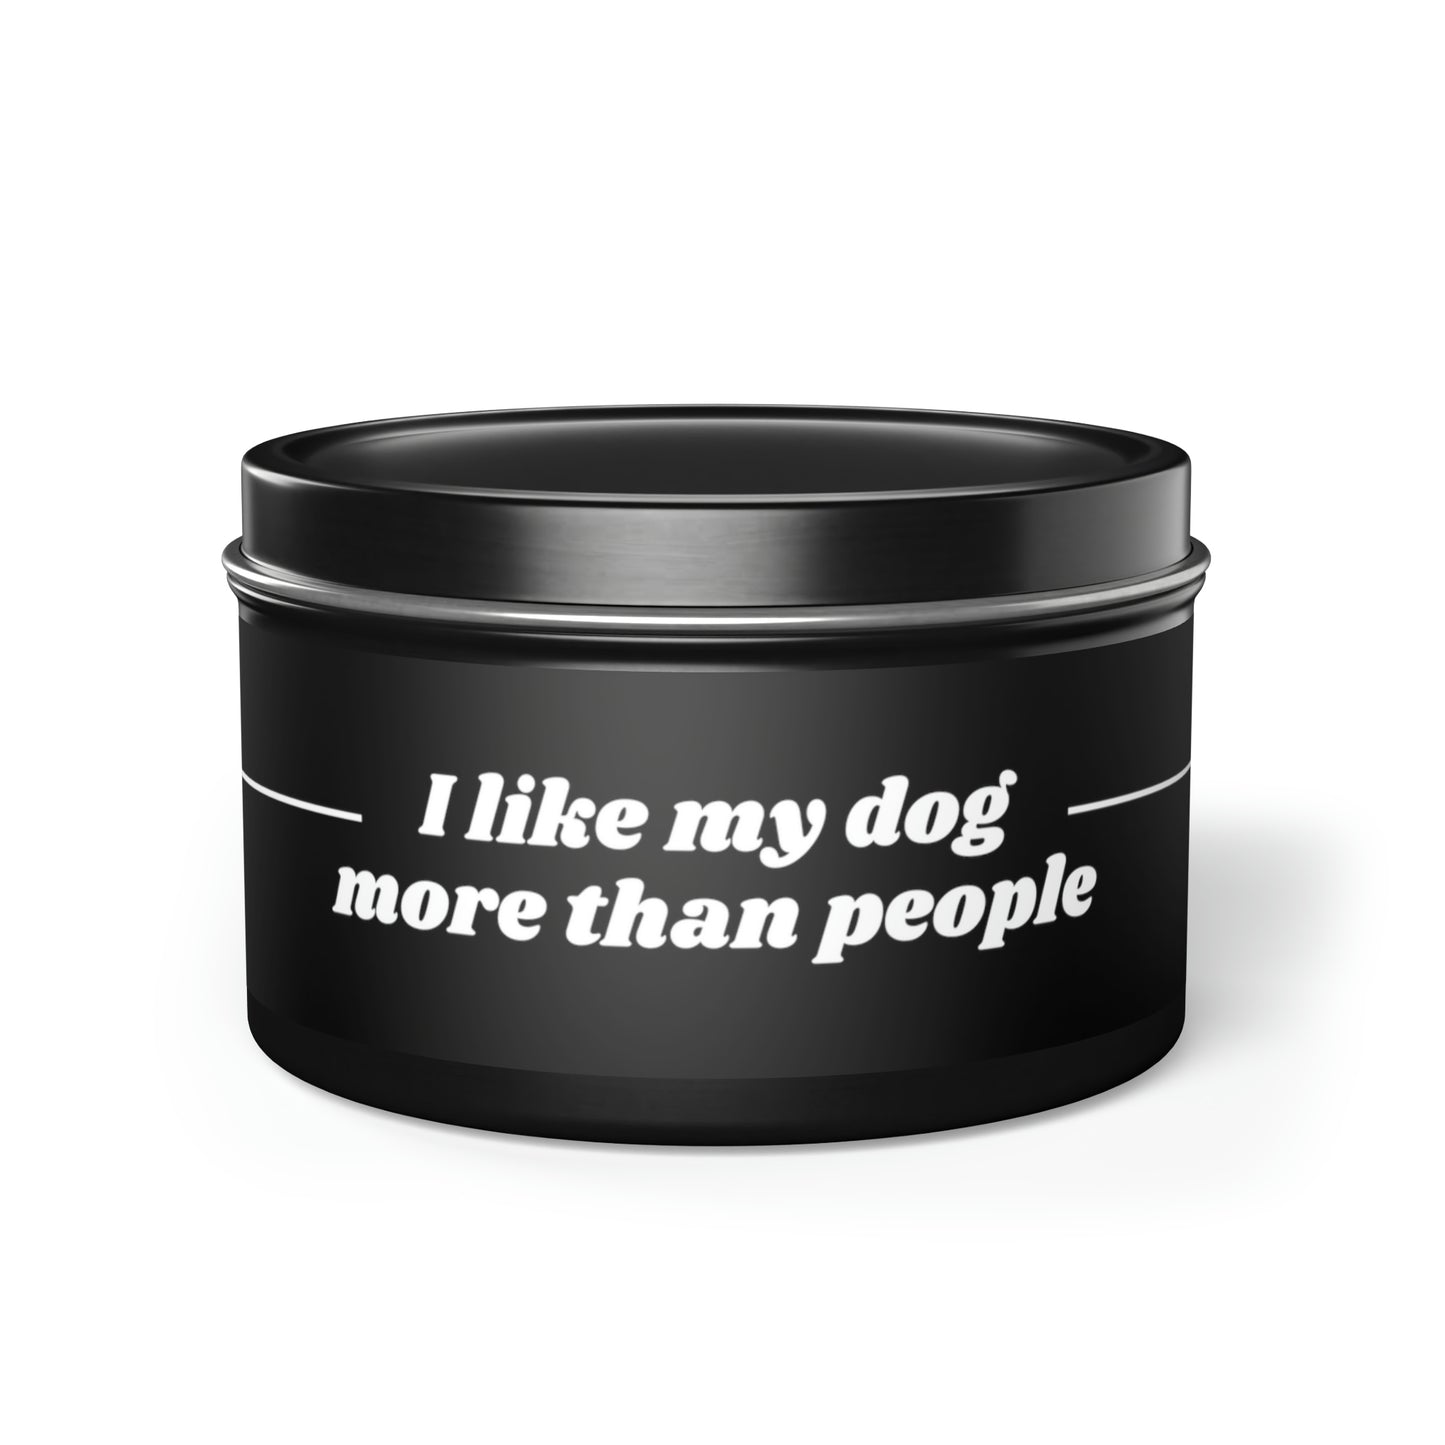 Love My Dog Candle Scented Organic Soy Tin Candles